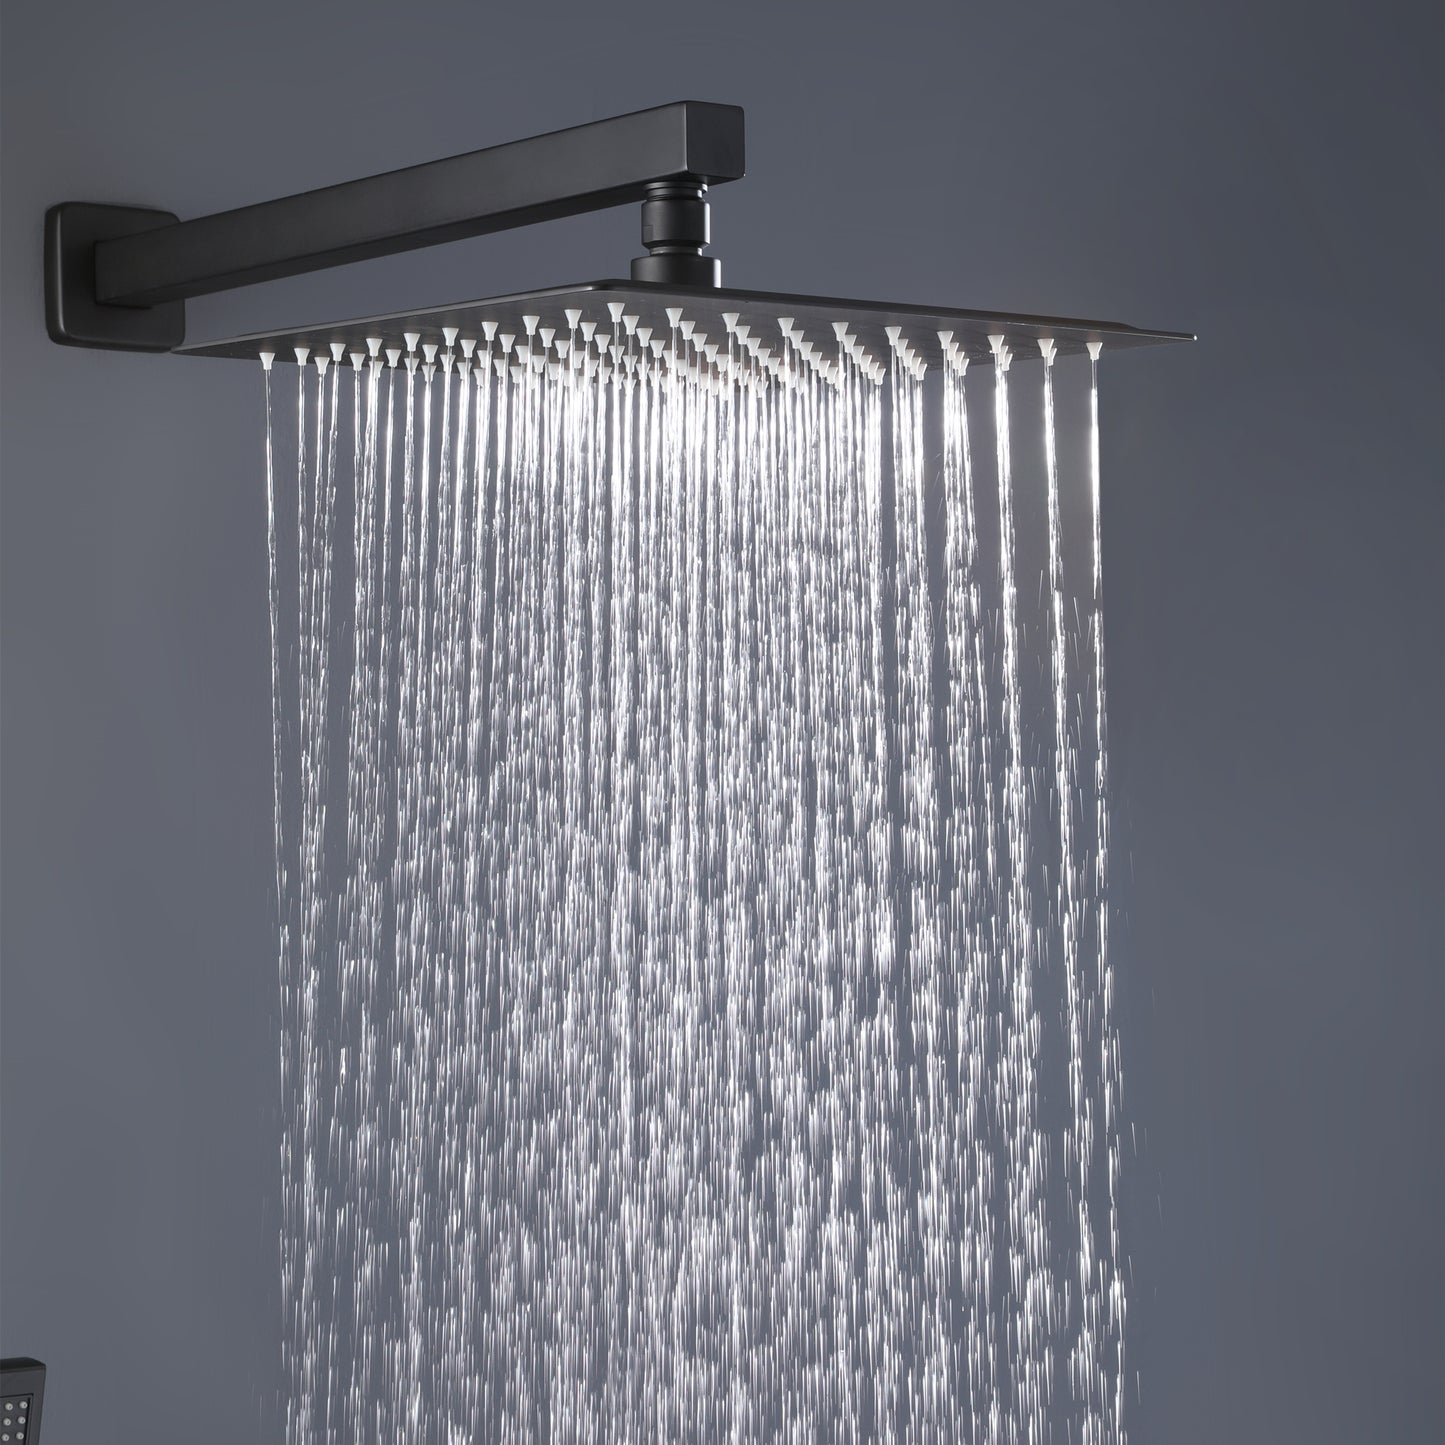 Trustmade 12 Inches Matte Black Shower System Bathroom Luxury Rain Mixer Shower Combo Set Wall Mounted Rainfall Shower Head System, Rough-in Valve Body and Trim Included - 2W01